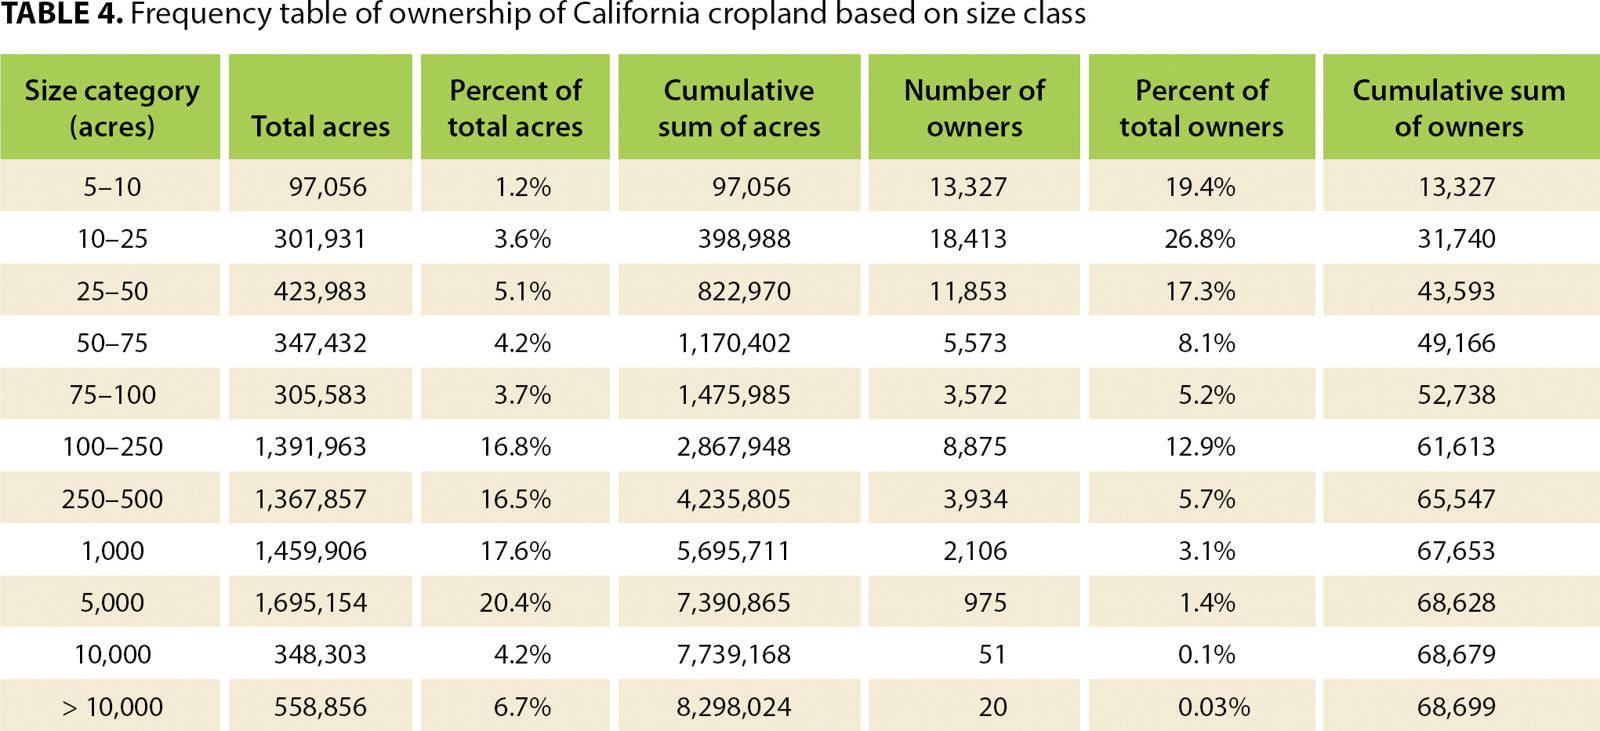 Frequency table of ownership of California cropland based on size class